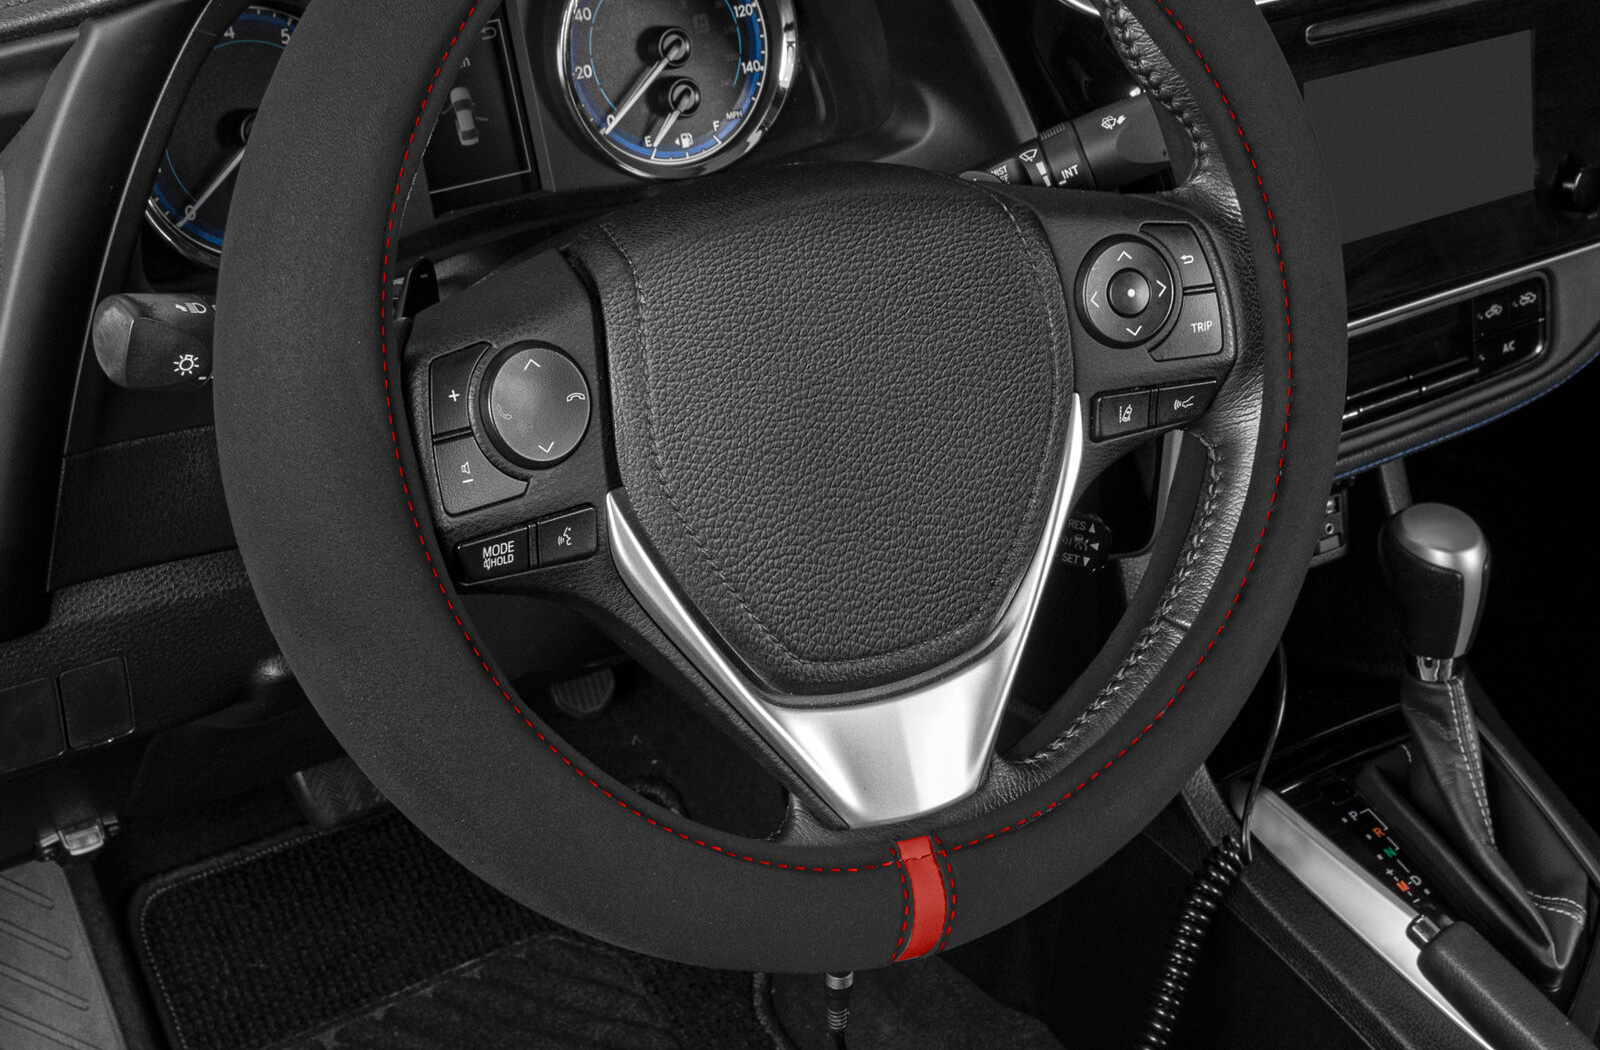 How to Shop for a Steering Wheel Cover - eBay Motors Blog